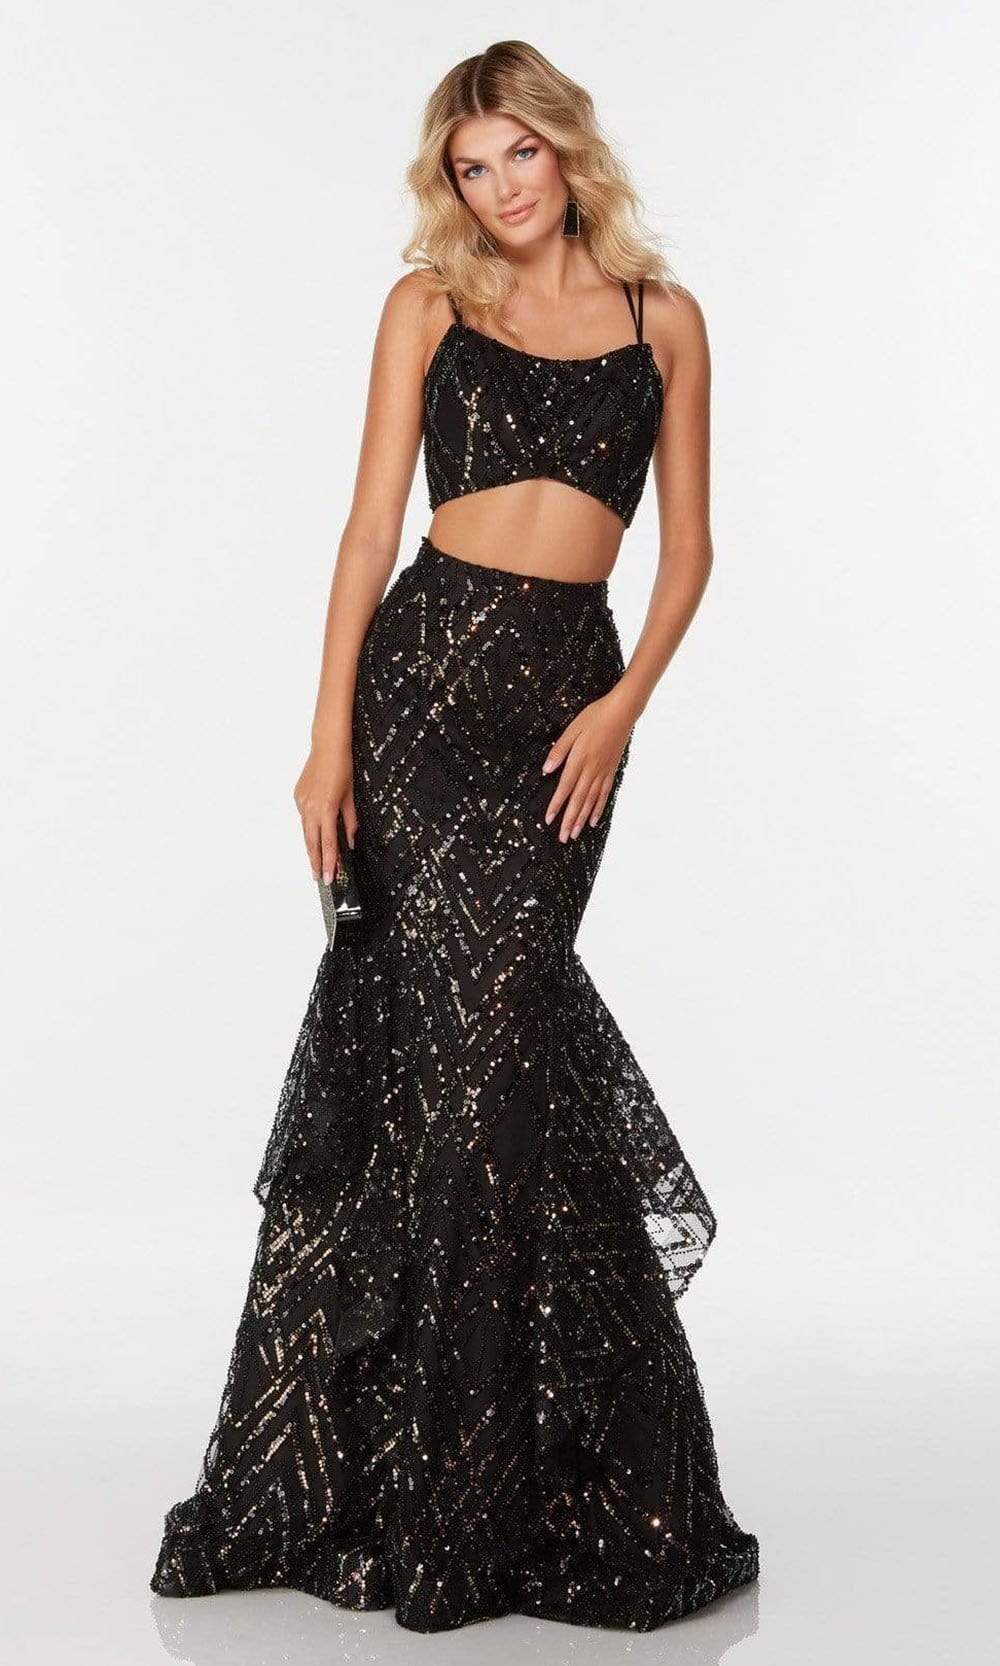 Alyce Paris - 61212 Two Piece Strappy Sequined Gown Prom Dresses 000 / Black/Gold